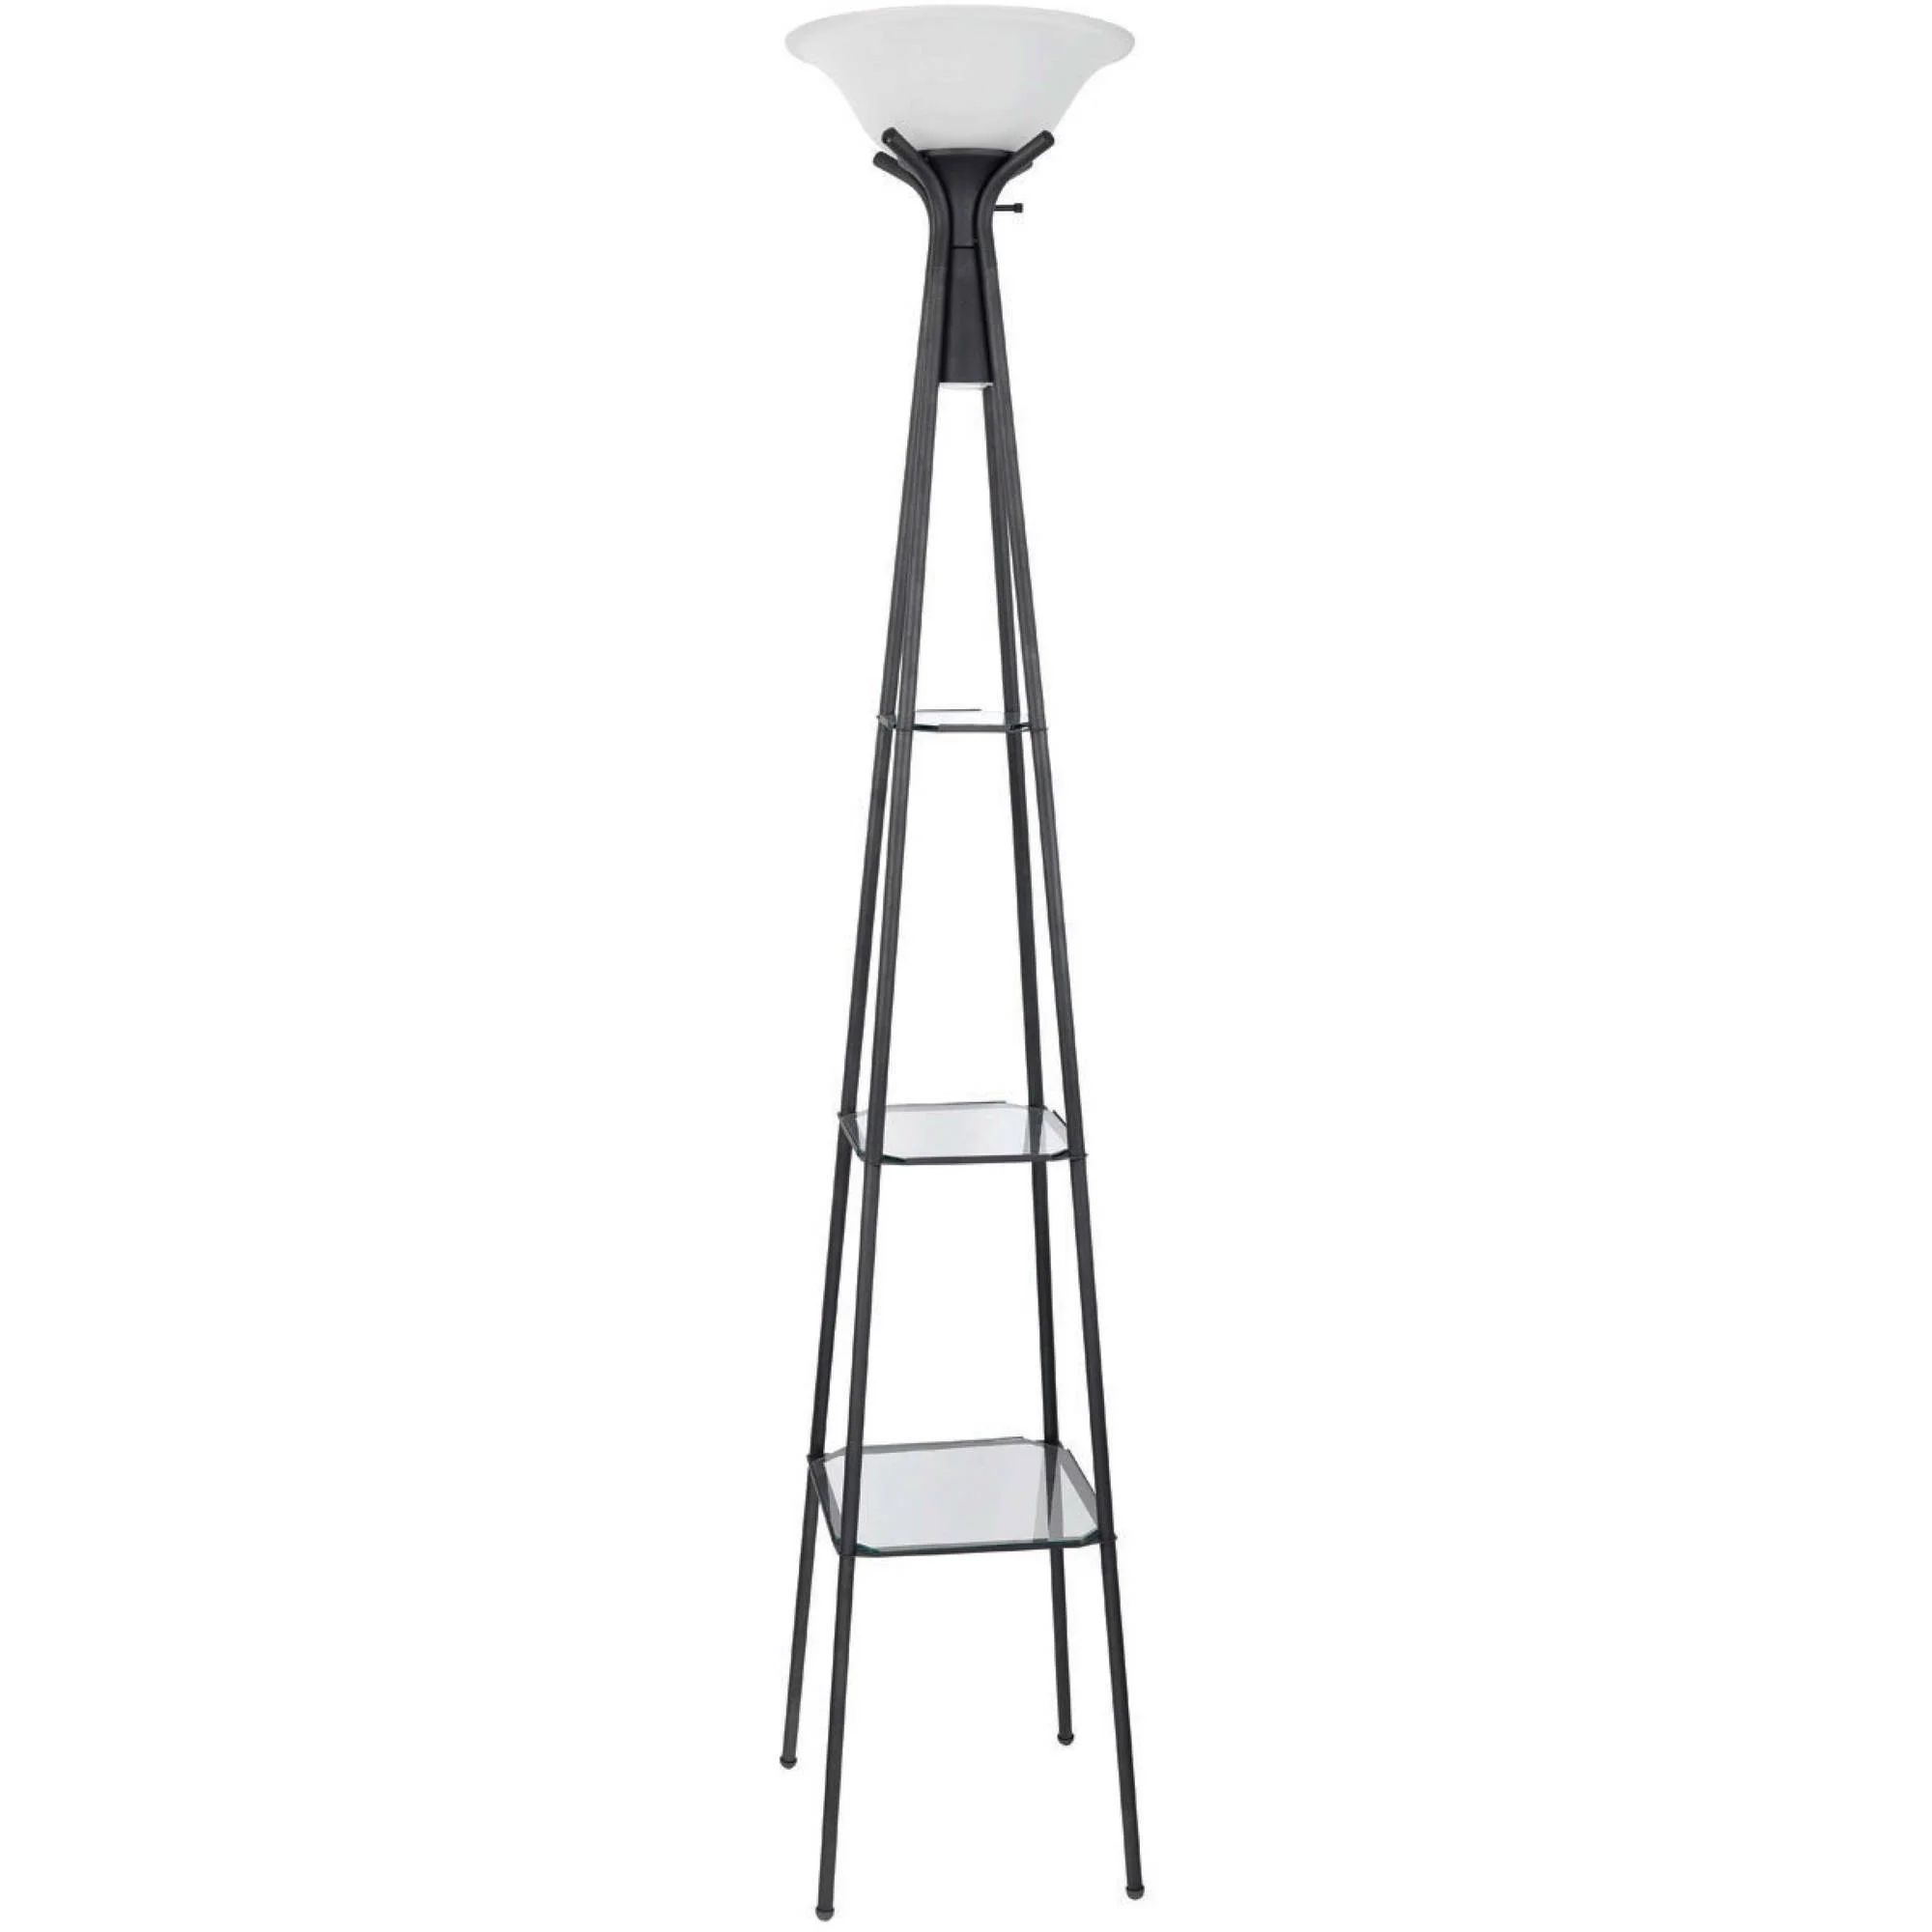 Coaster Company Floor Lamp, Charcoal Finish with Frosted Glass Shade | Walmart (US)